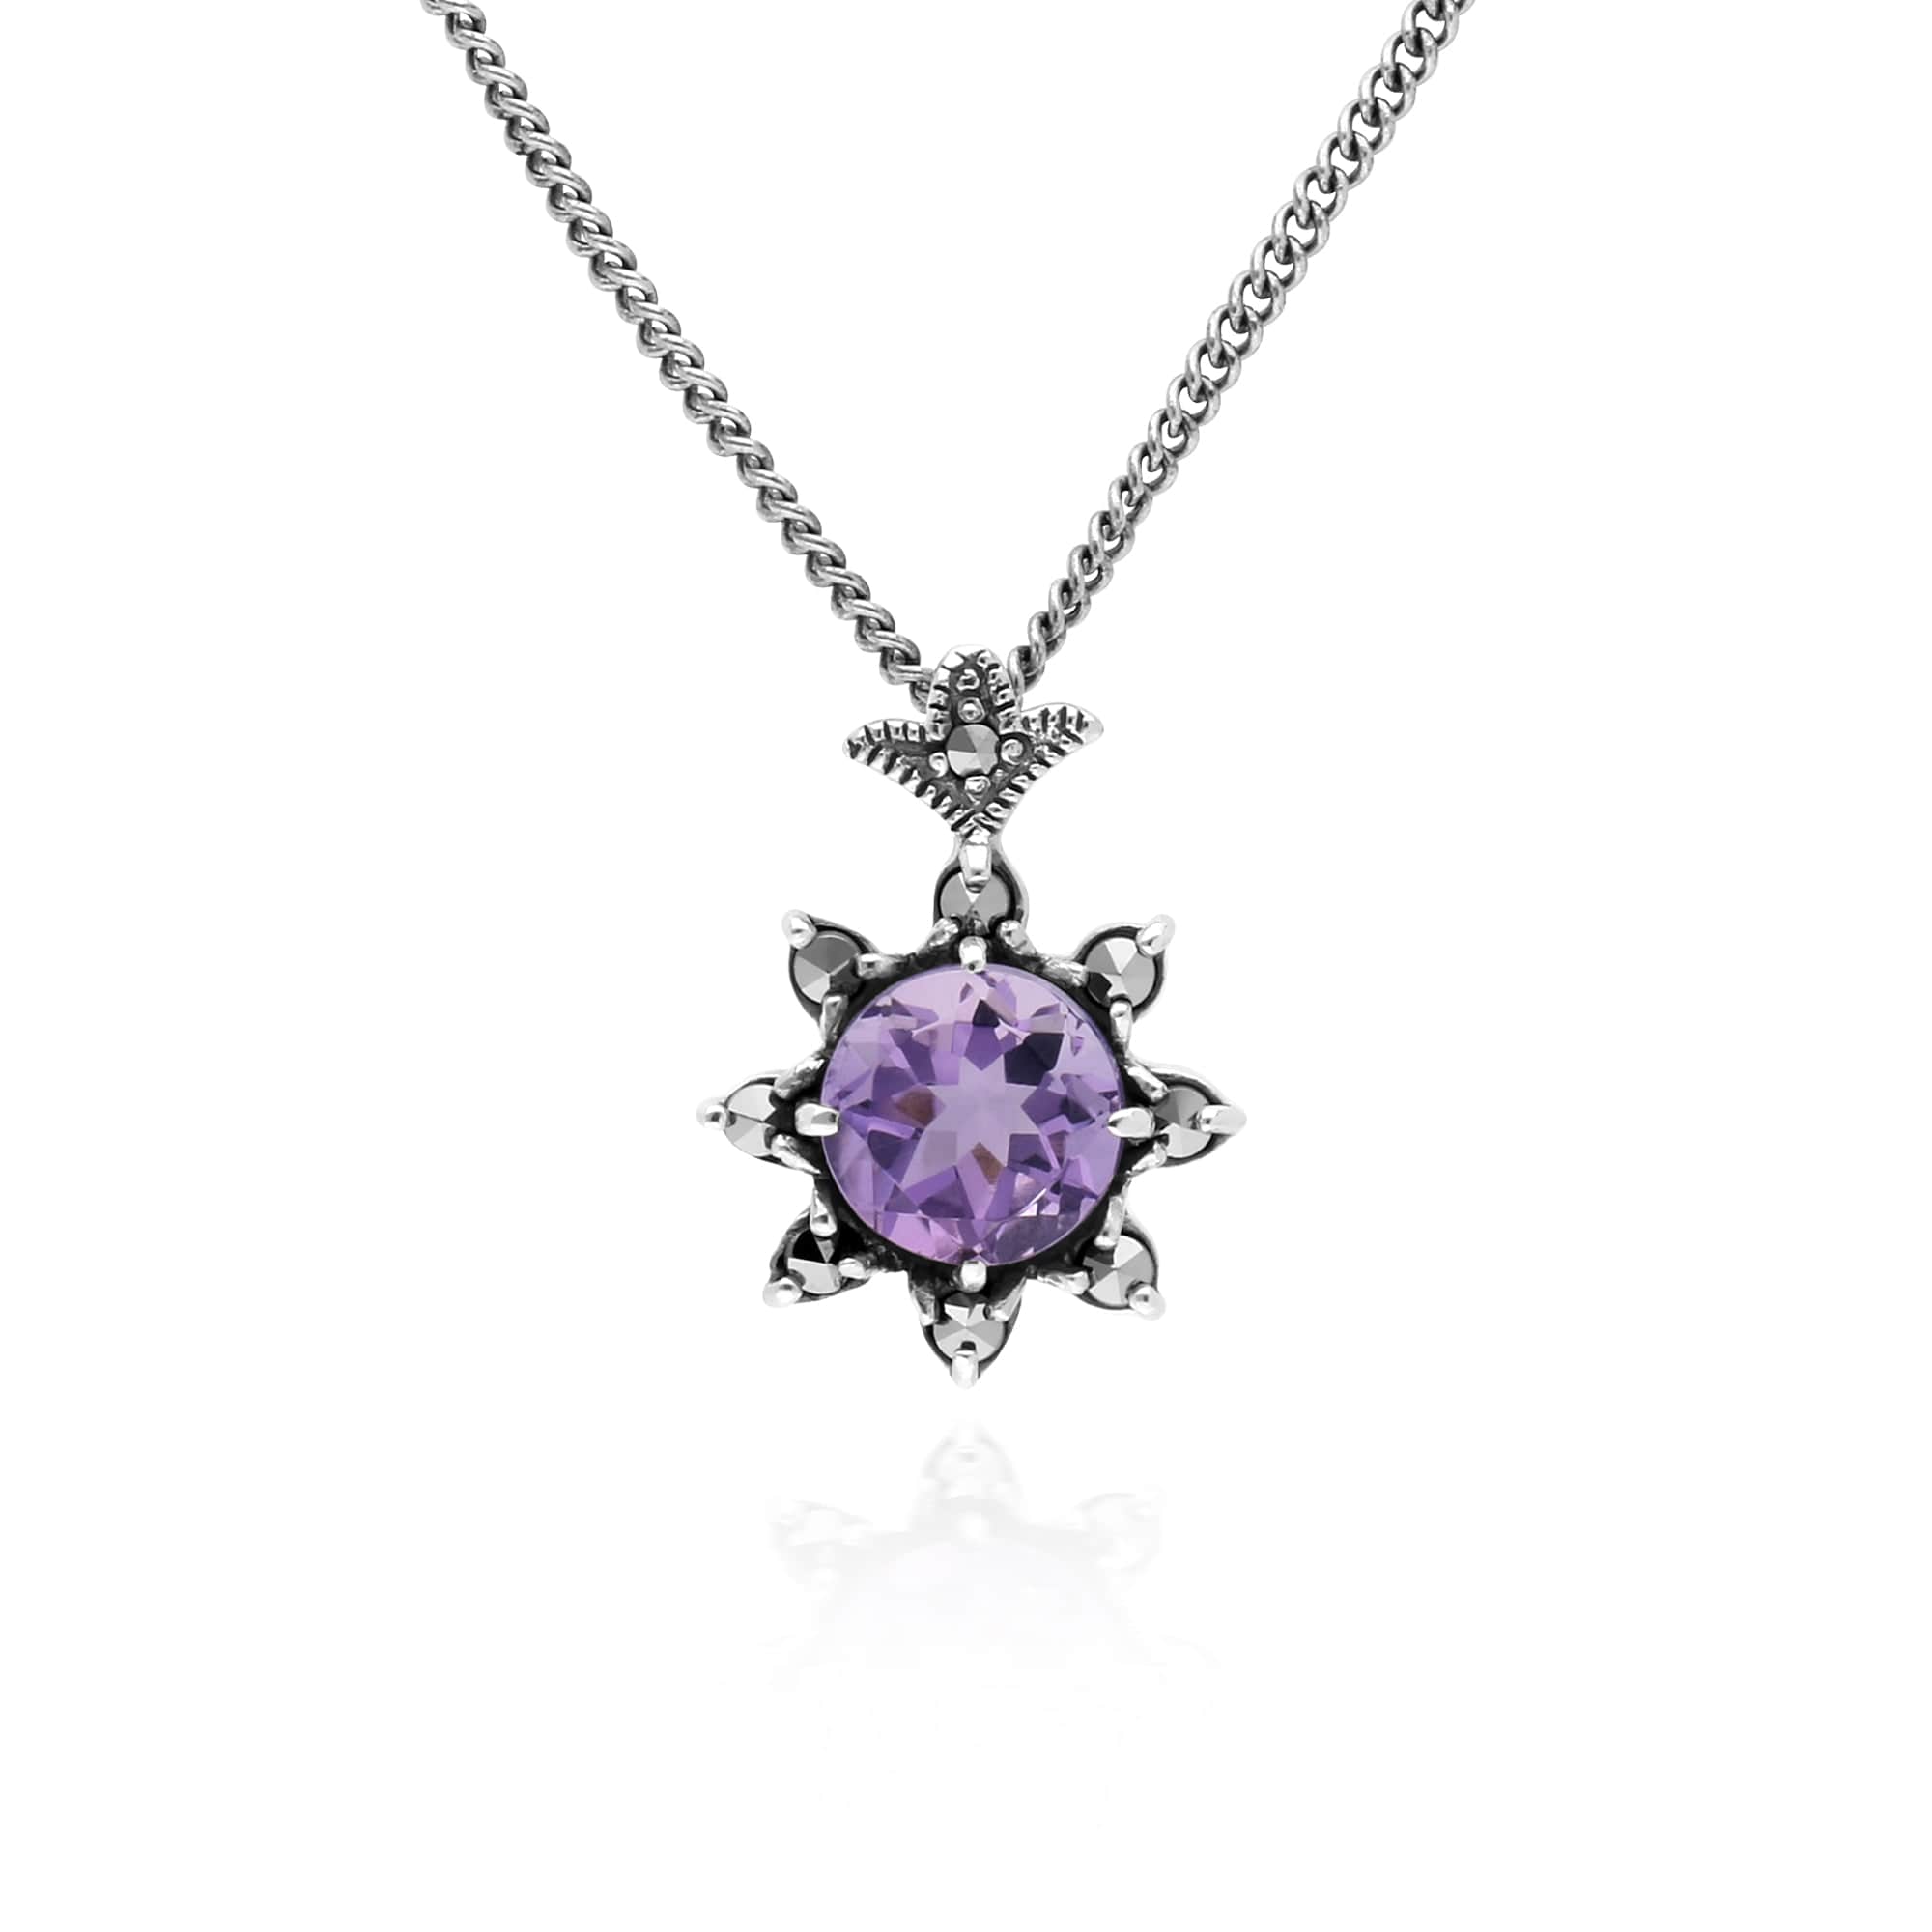 214N696002925-214R599502925 Art Nouveau Style Style Round Amethyst & Marcasite Starburst Pendant & Ring Set in 925 Sterling Silver 2